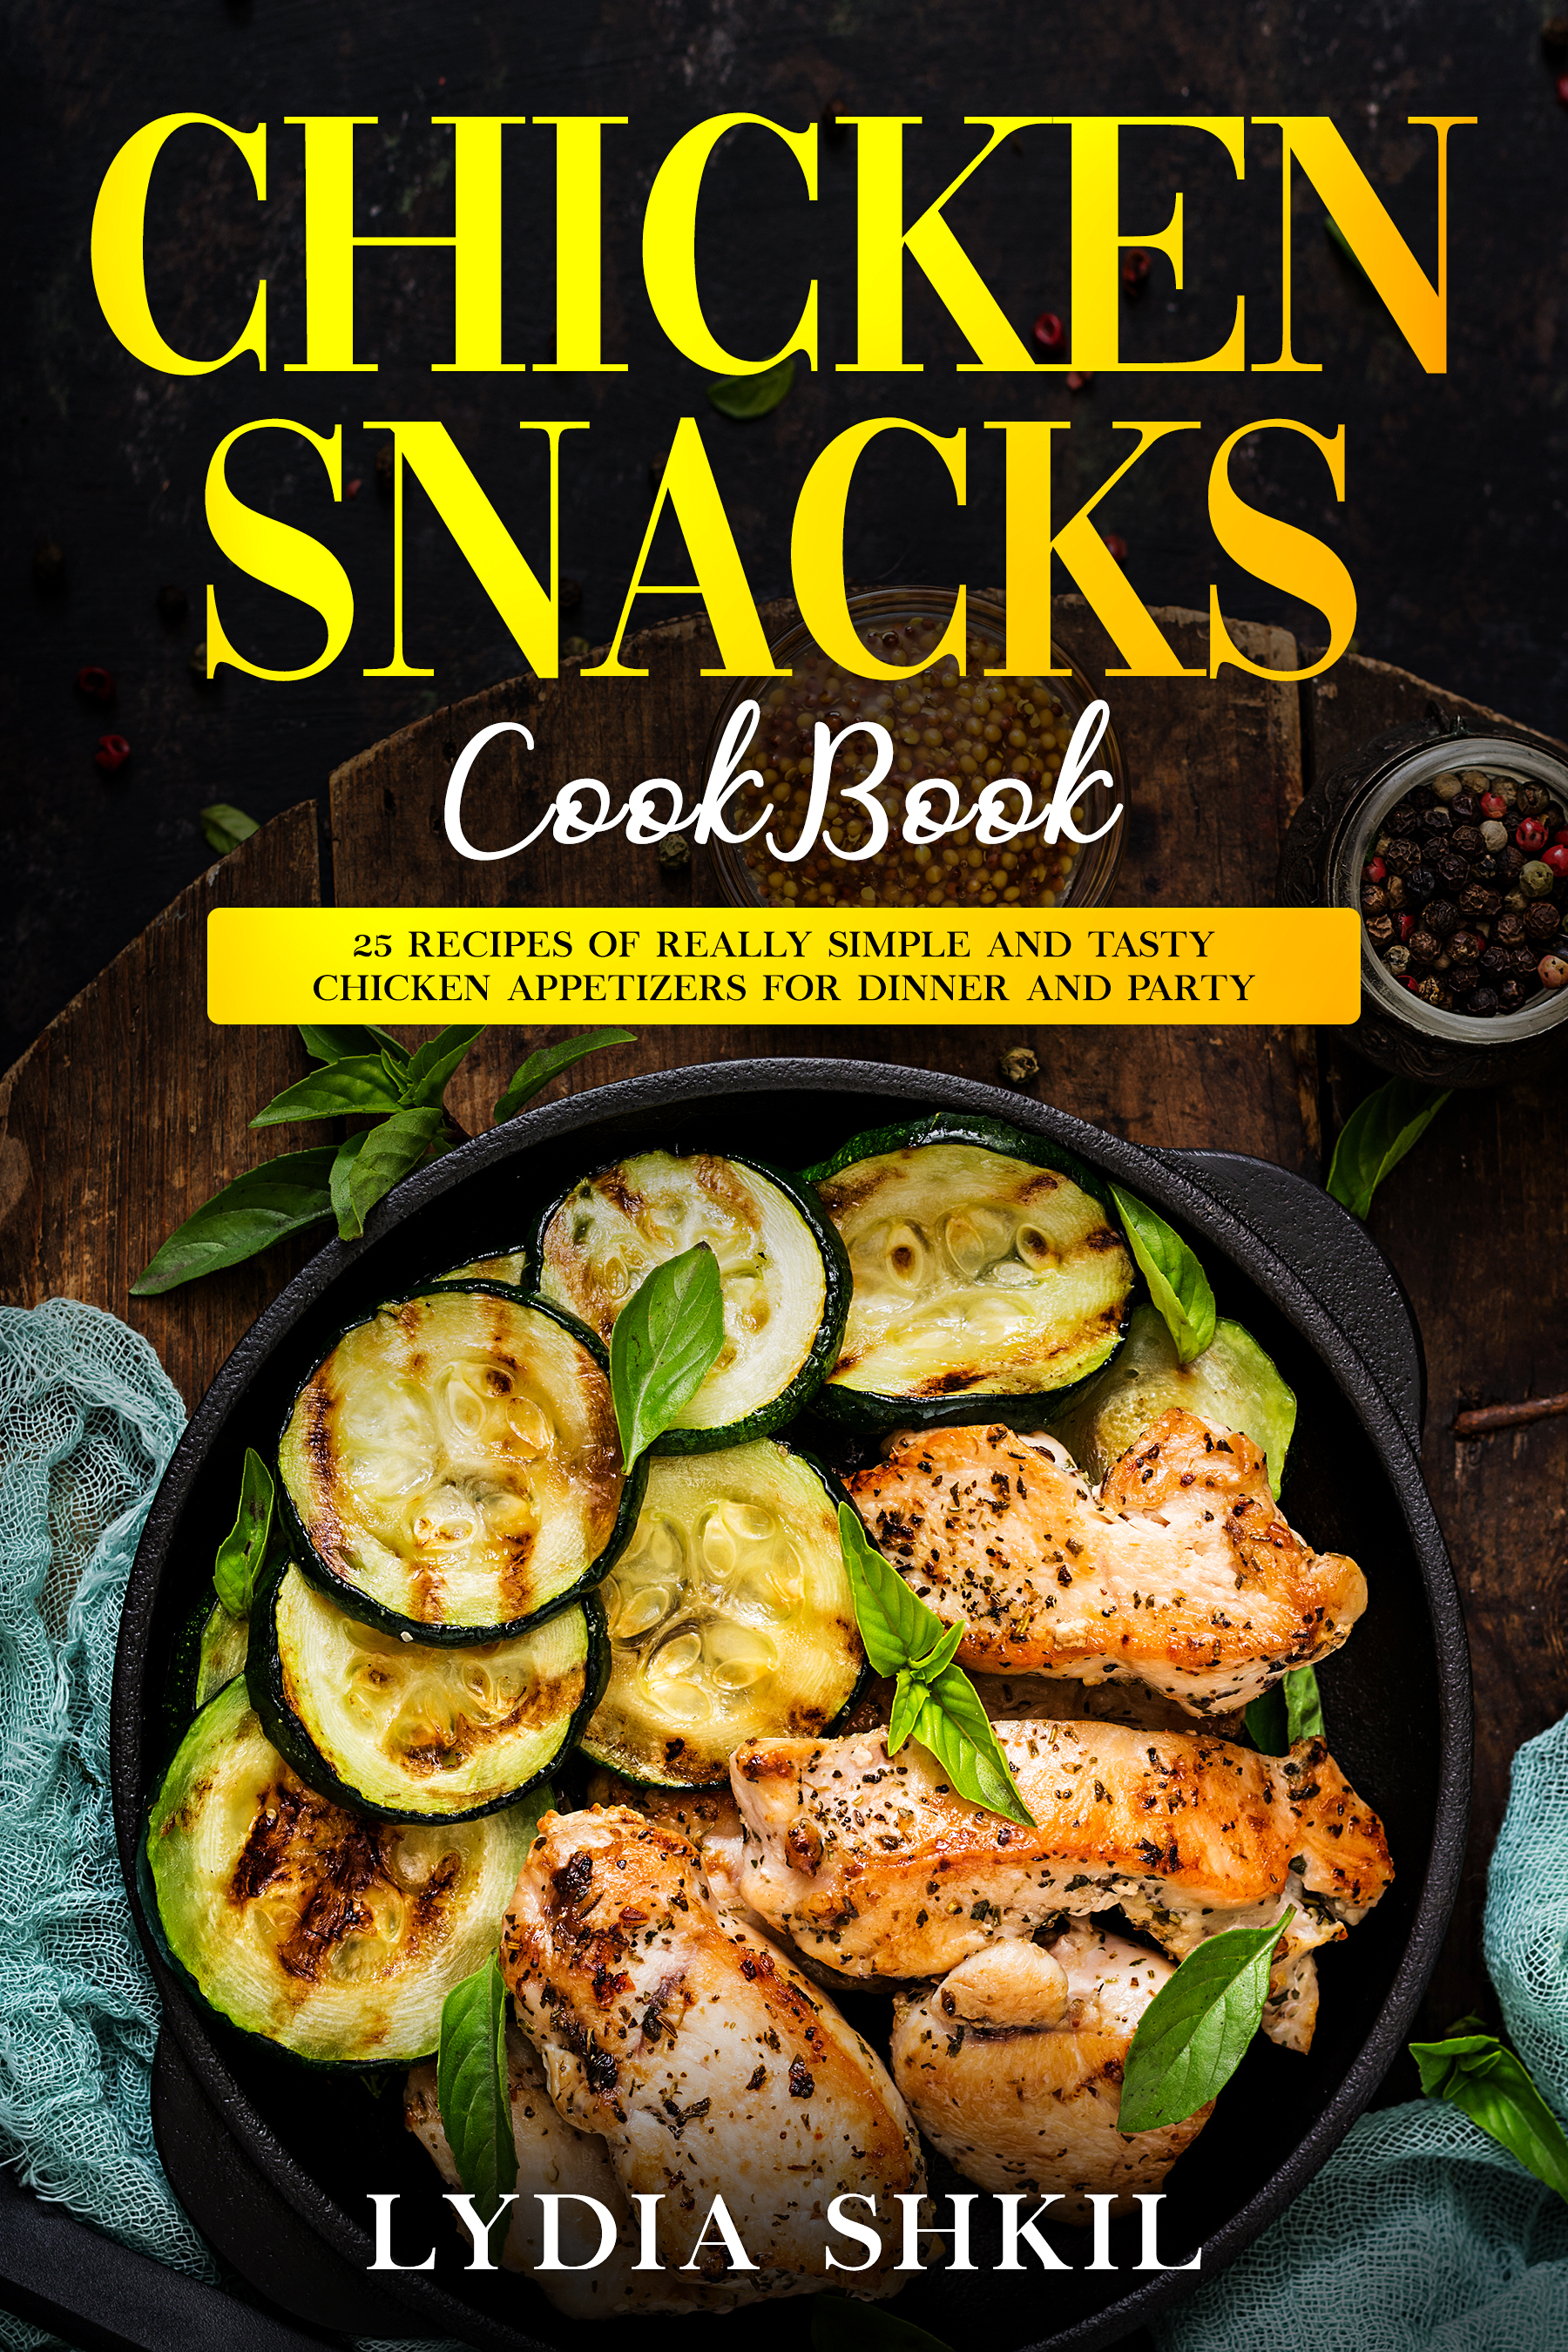 FREE: Chicken snacks cook Book by LYDIA SHKIL